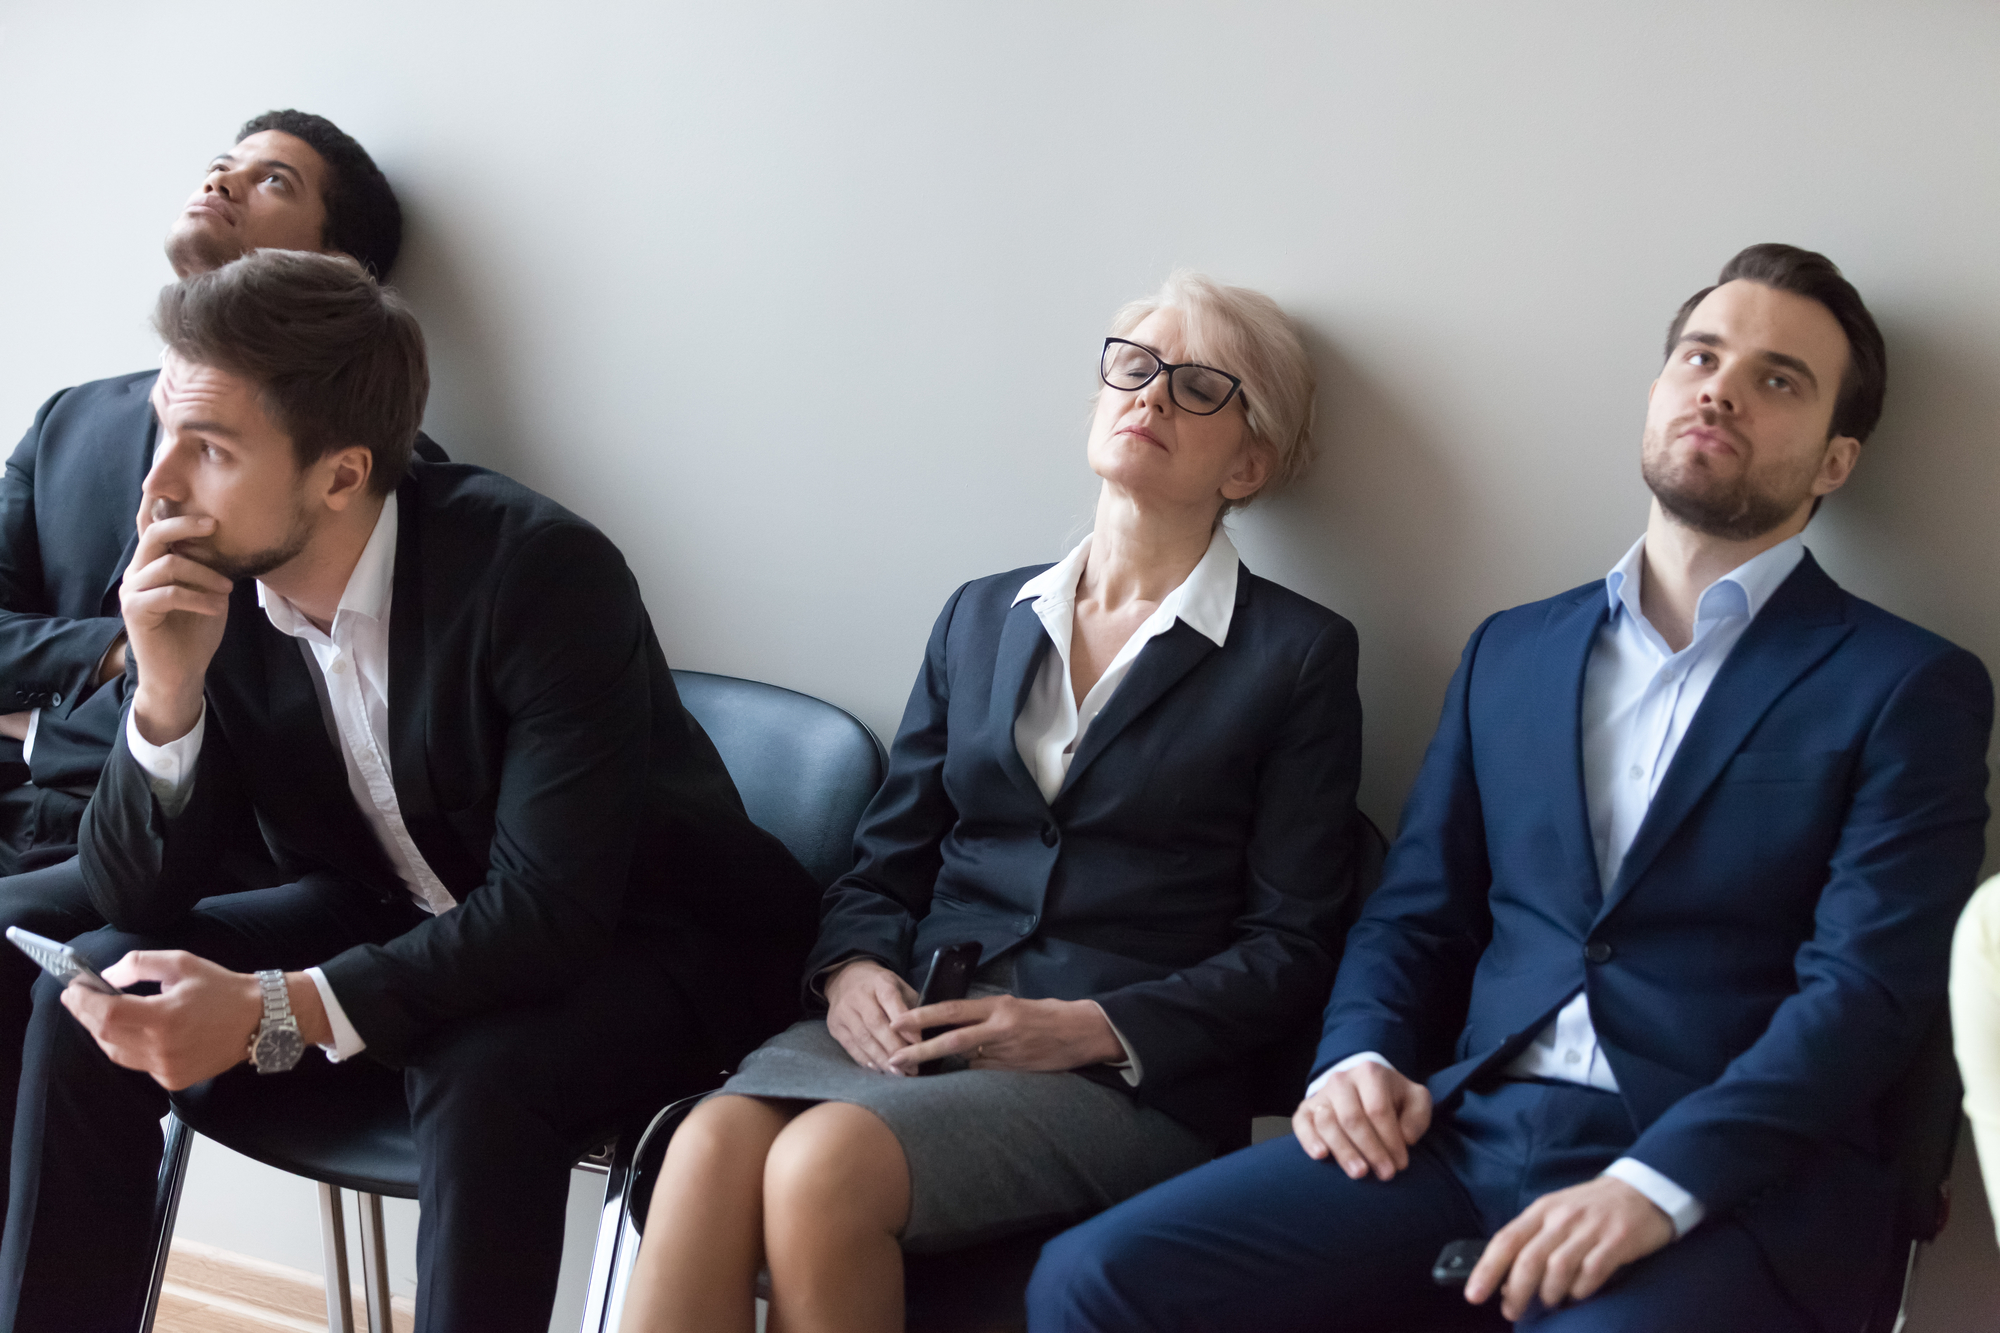 Diverse applicants getting bored in queue waiting for job interview